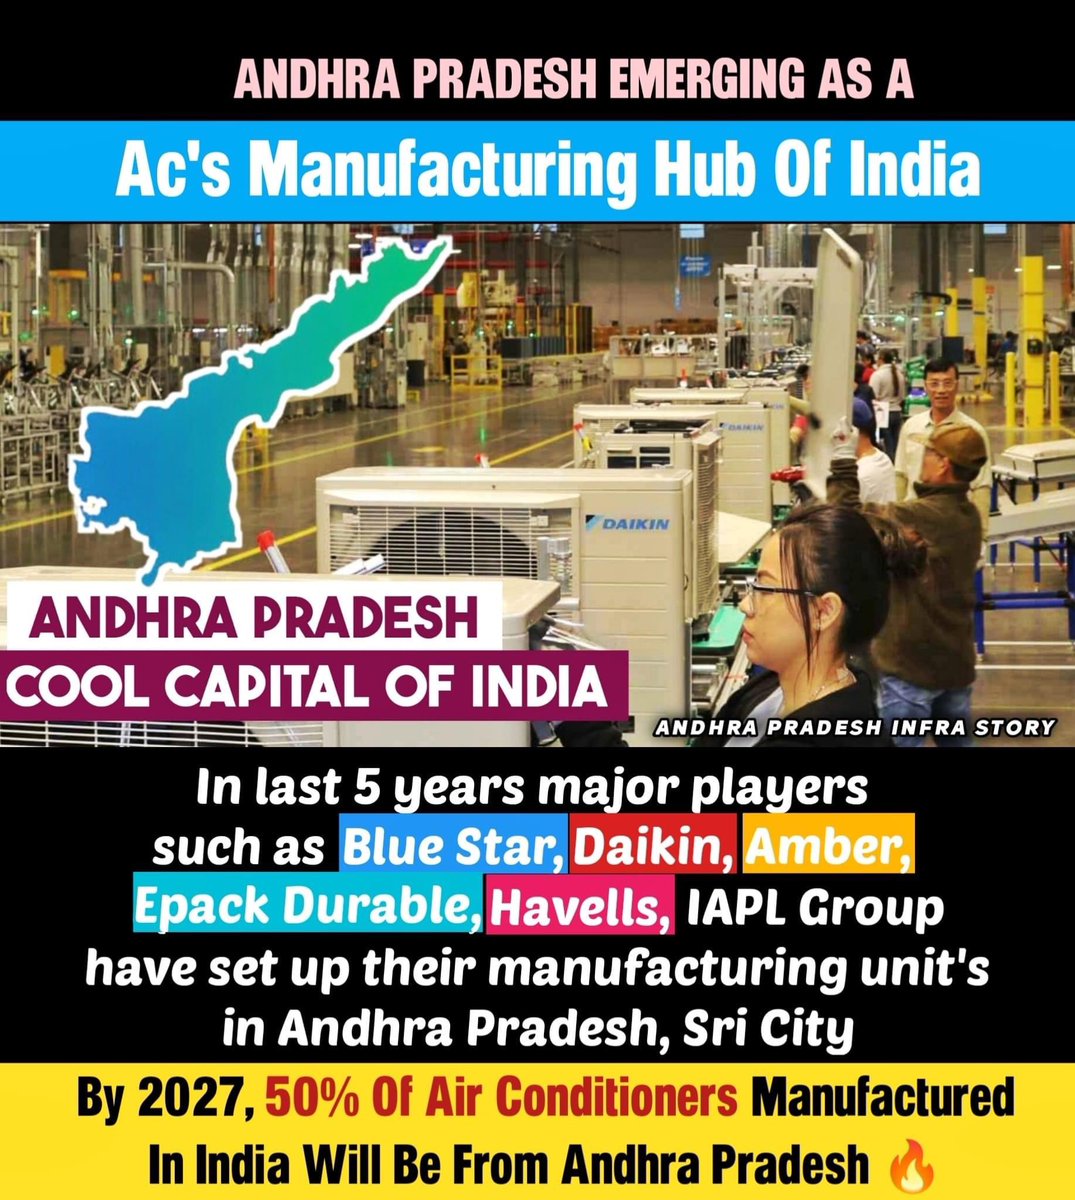 Proud Moment For Andhra Pradesh 😍

By 2027, 50% Of AC's Manufactured In India Will Be From Andhra Pradesh 🔥

#AndhraPradesh #Development #ManufacturingHub #AirConditioners #SriCity #MadeInAP #YSJaganAgainIn2024 
#voteforfanmay132024